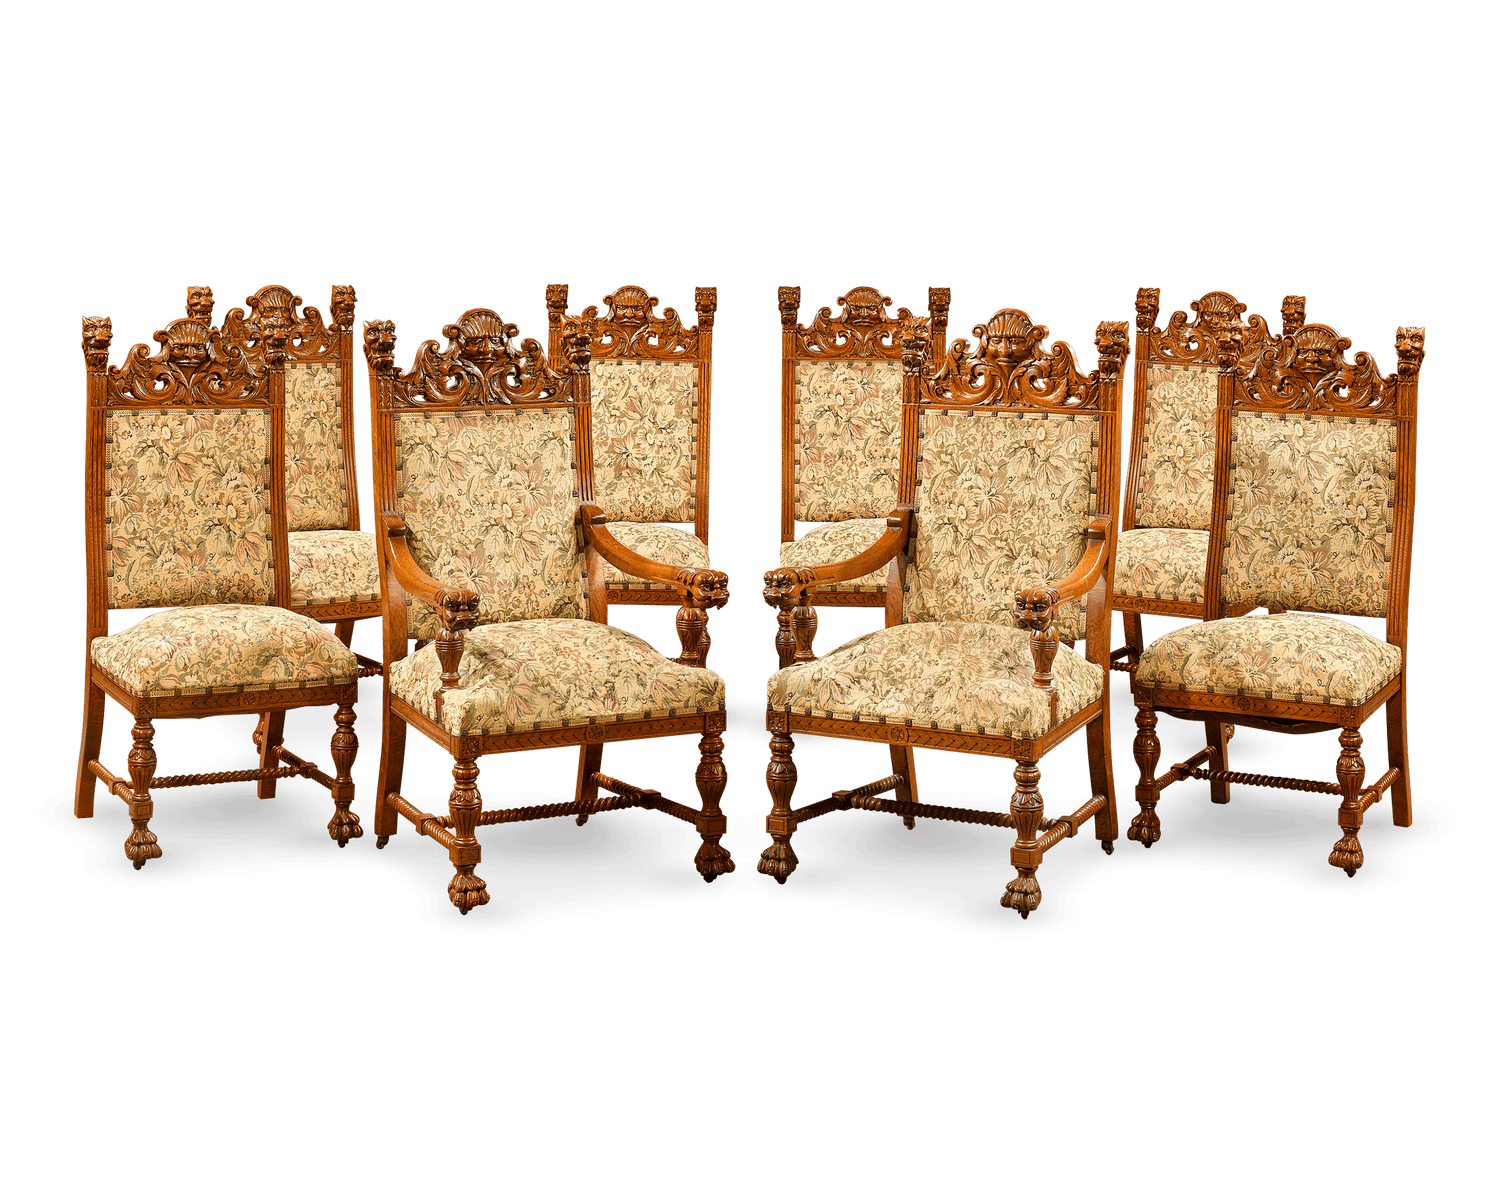 The set retains its original six side and two arm chairs